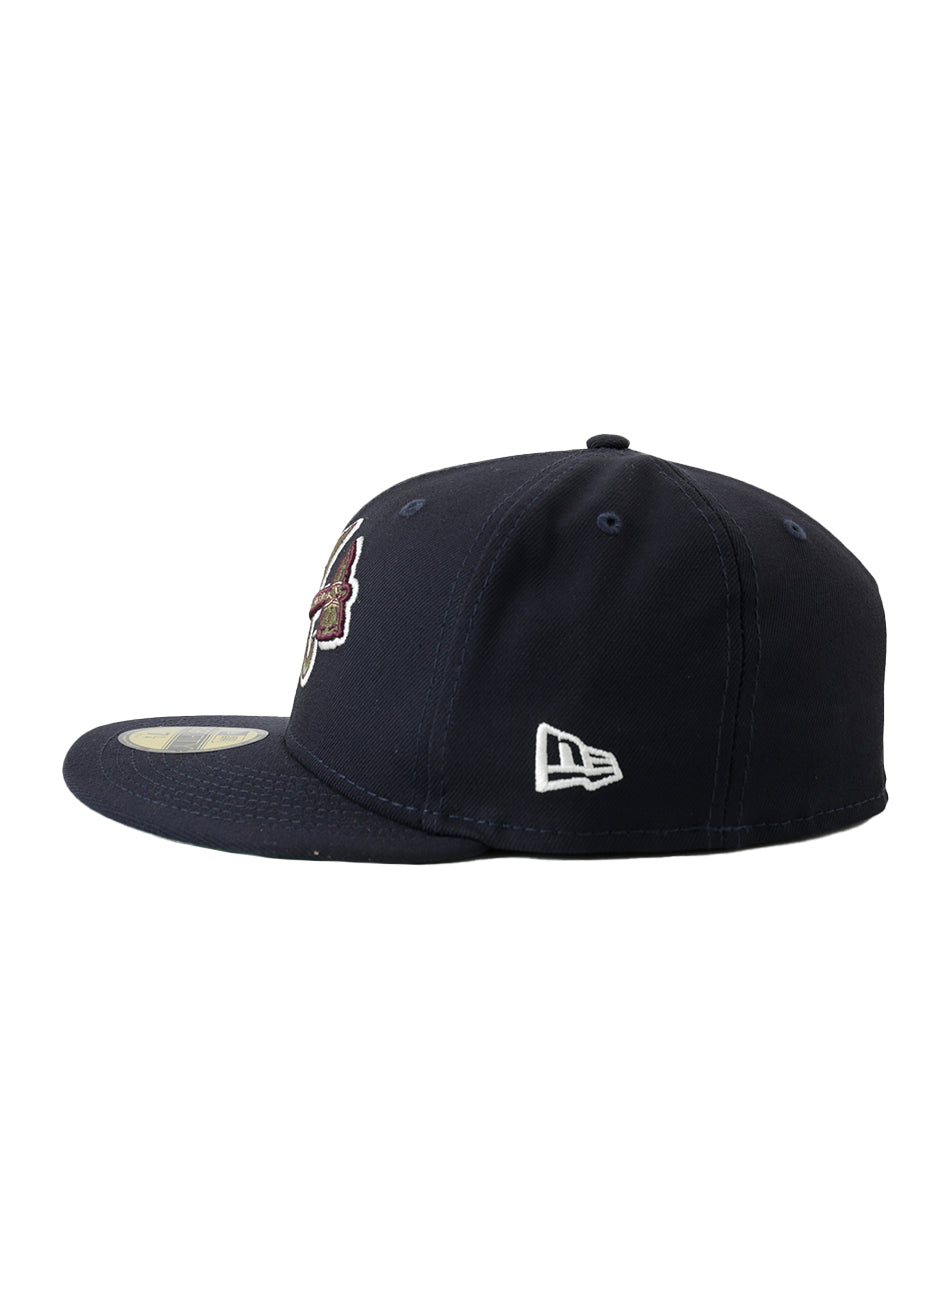 Atlanta Braves Botanical 59Fifty Fitted Cap